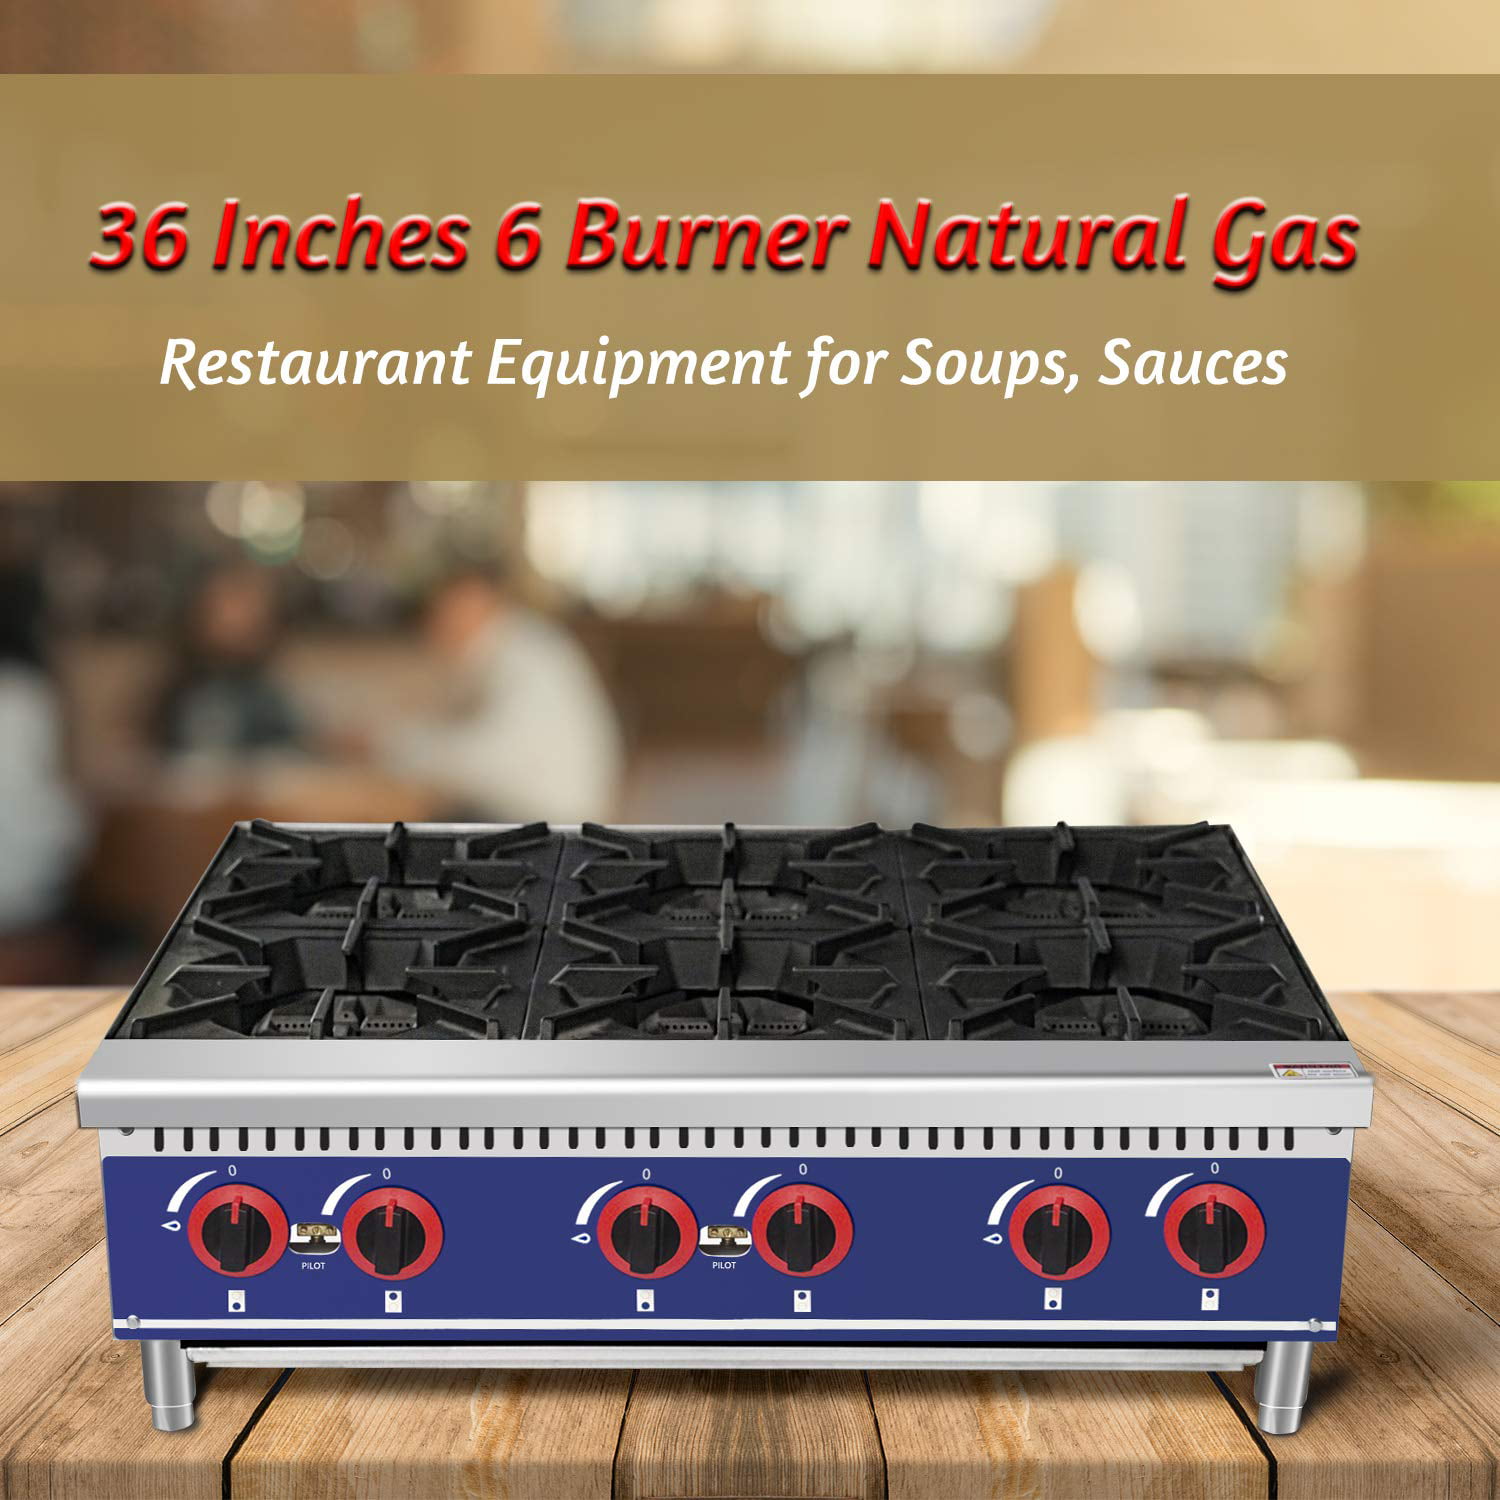 KITMA 12 Inches 2 Burner Natural Gas Range Sauces Commercial Countertop Hot Plate Restaurant Equipment for Soups 